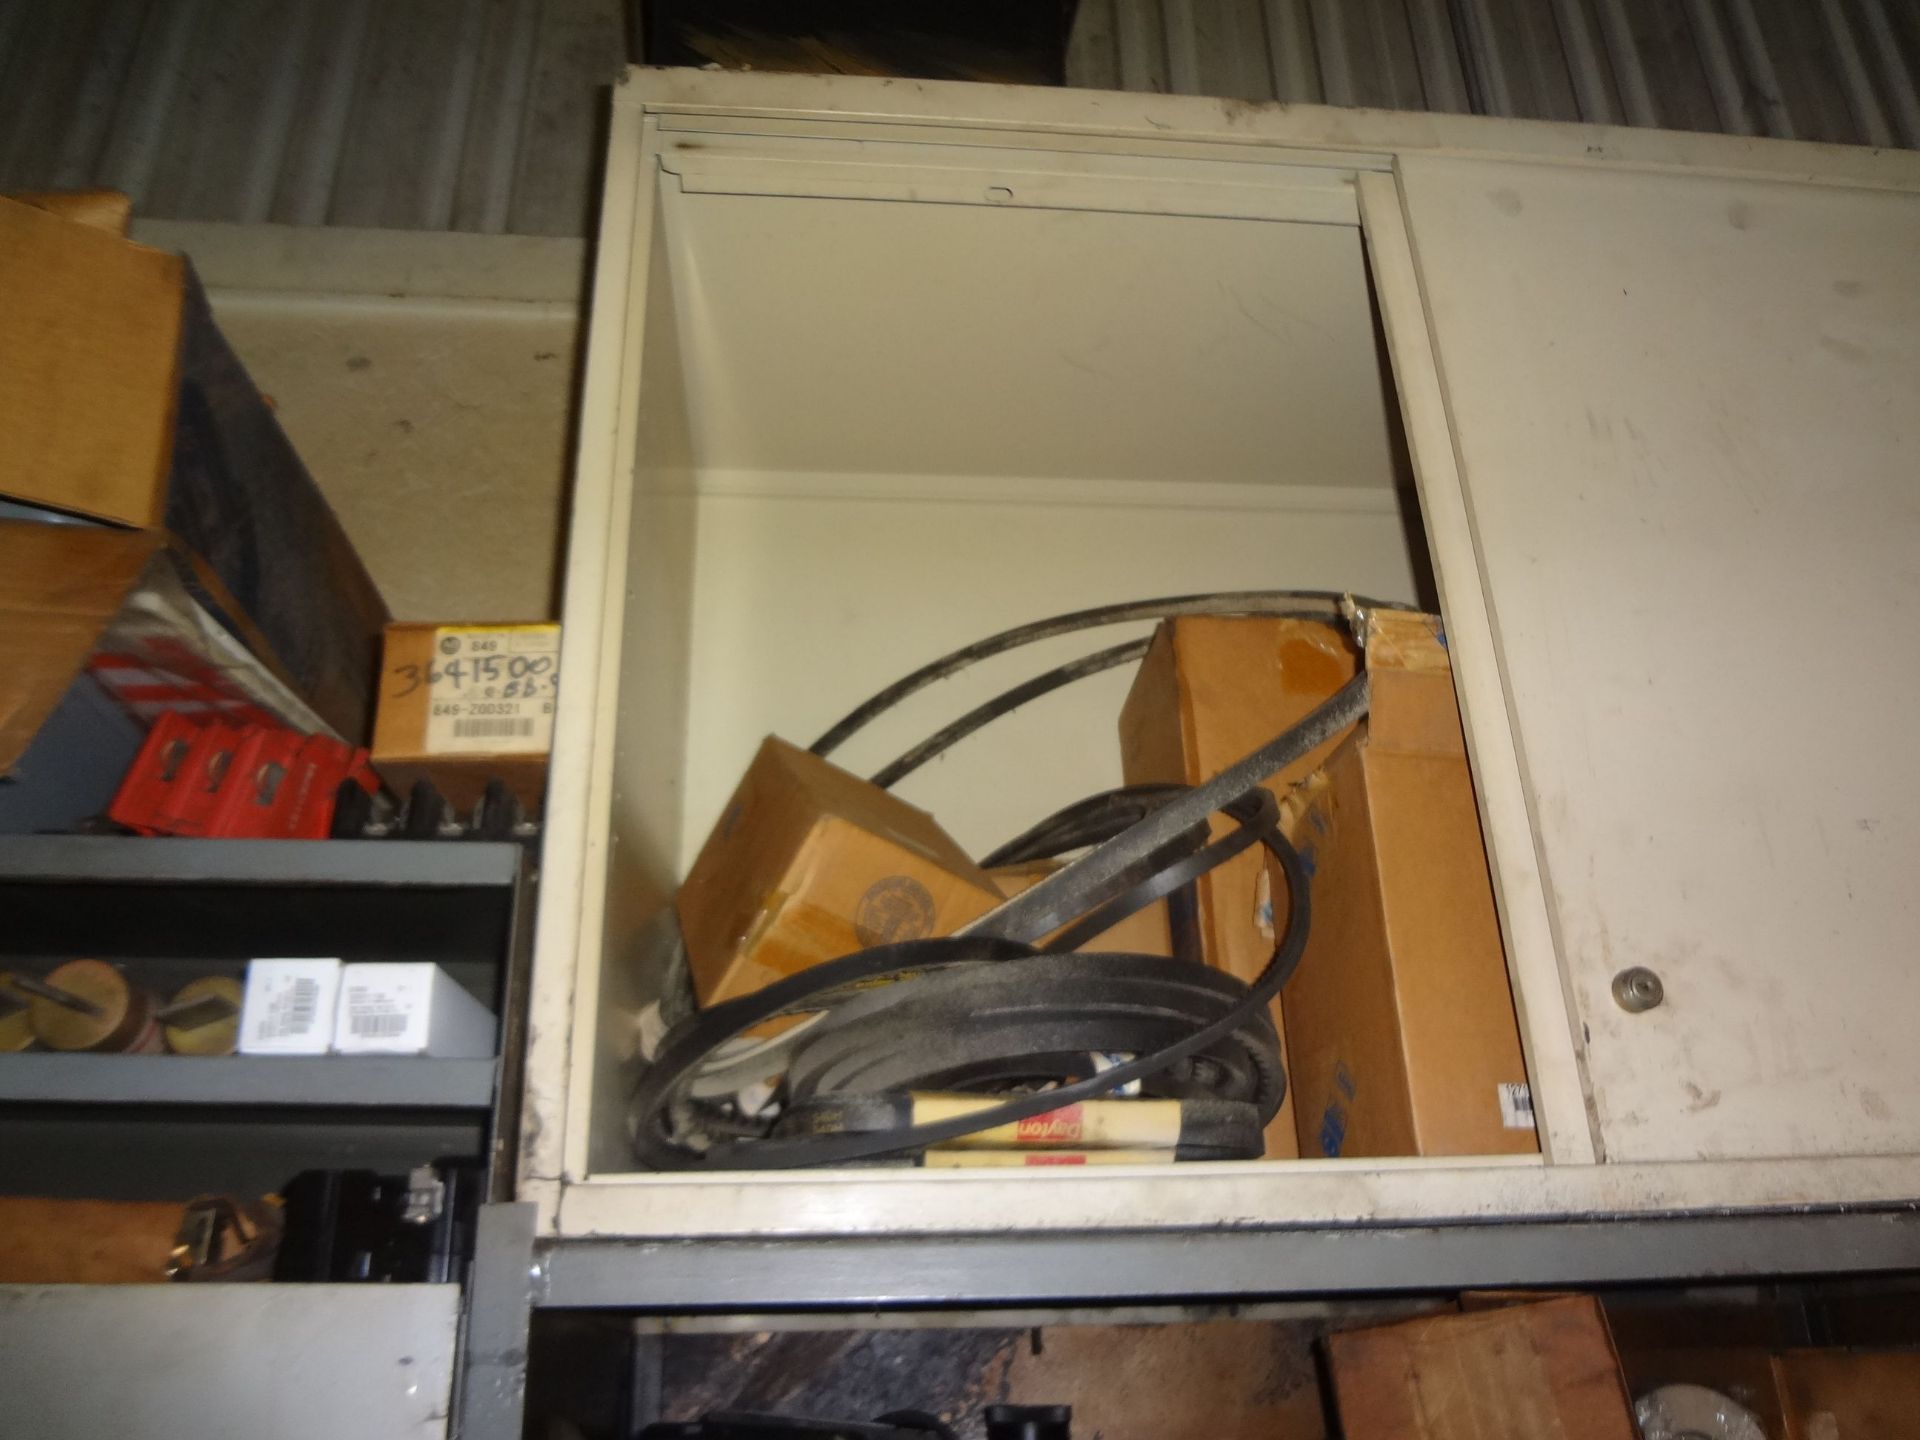 2-DOOR STEEL CABINET WITH CONTETNS INCLUDING LIFT TRUCK PARTS, MACHINE PARTS, FUSES, ELECTRICAL, - Image 5 of 8